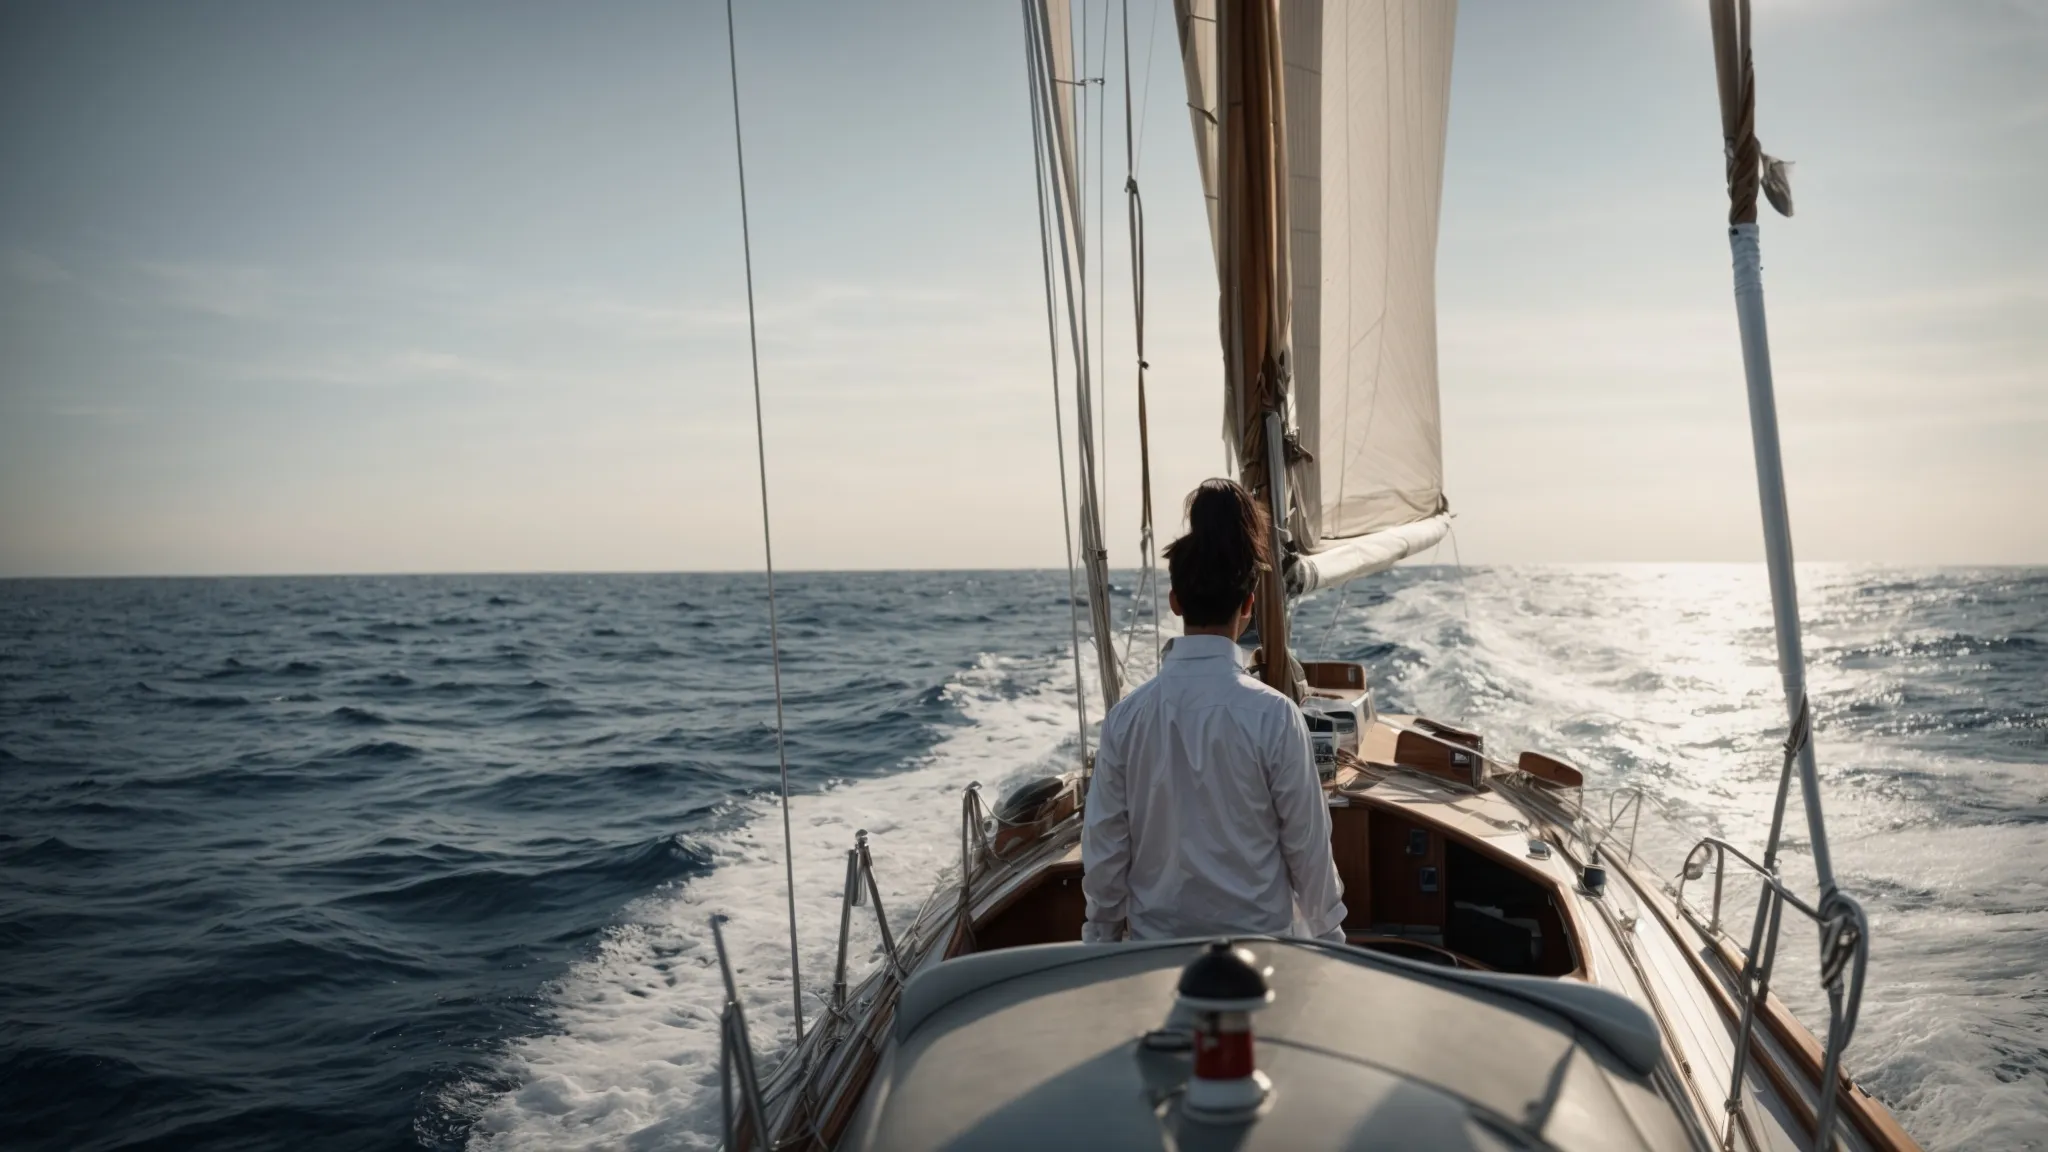 a solitary figure stands at the helm of a sailboat, navigating through calm seas under a clear sky.